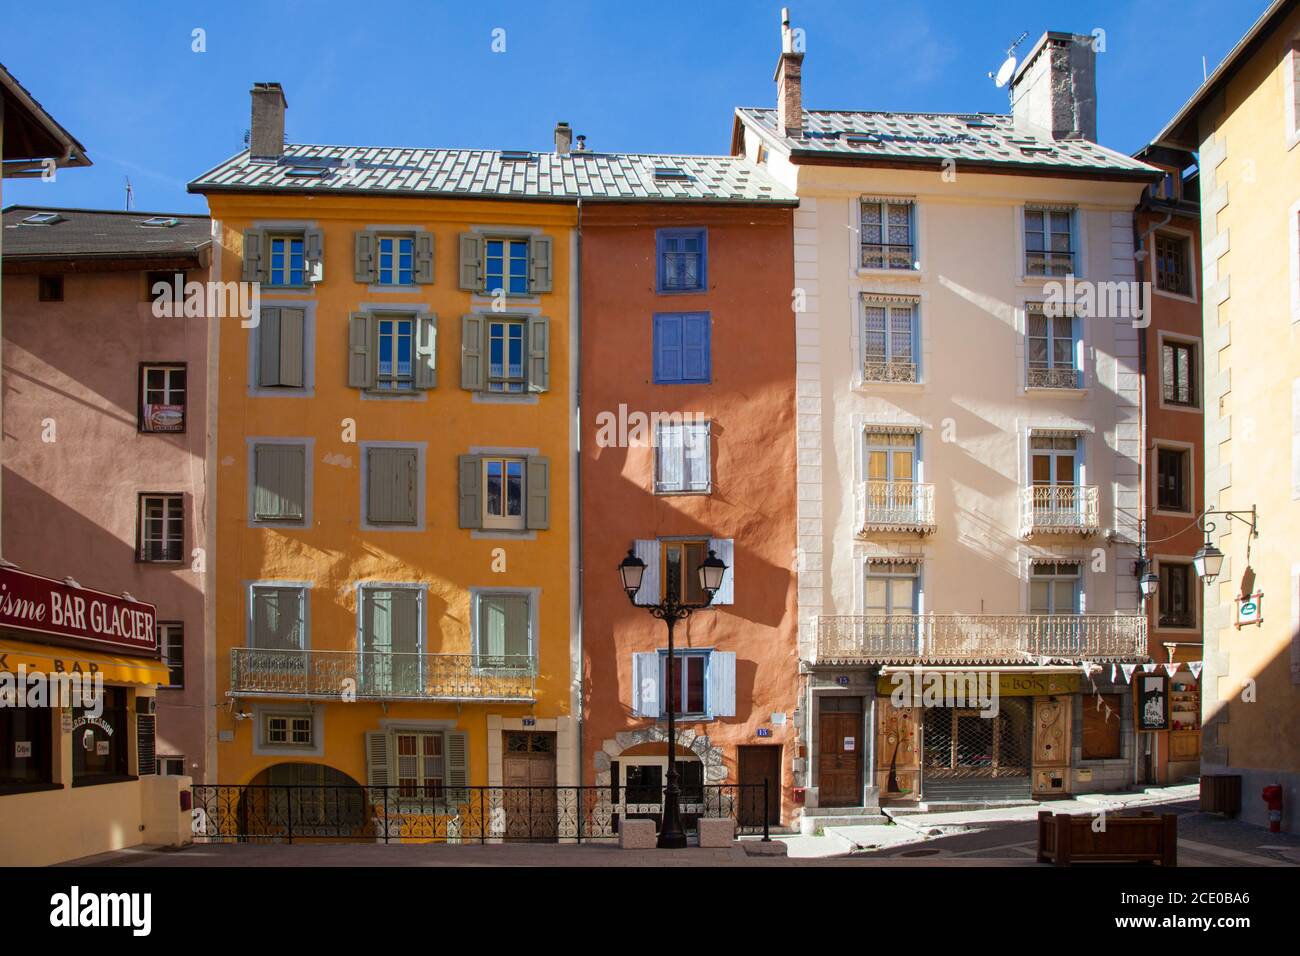 Narrow, tall, brightly painted houses in the Old Town of Briancon, Hautes-Alpes, France Stock Photo